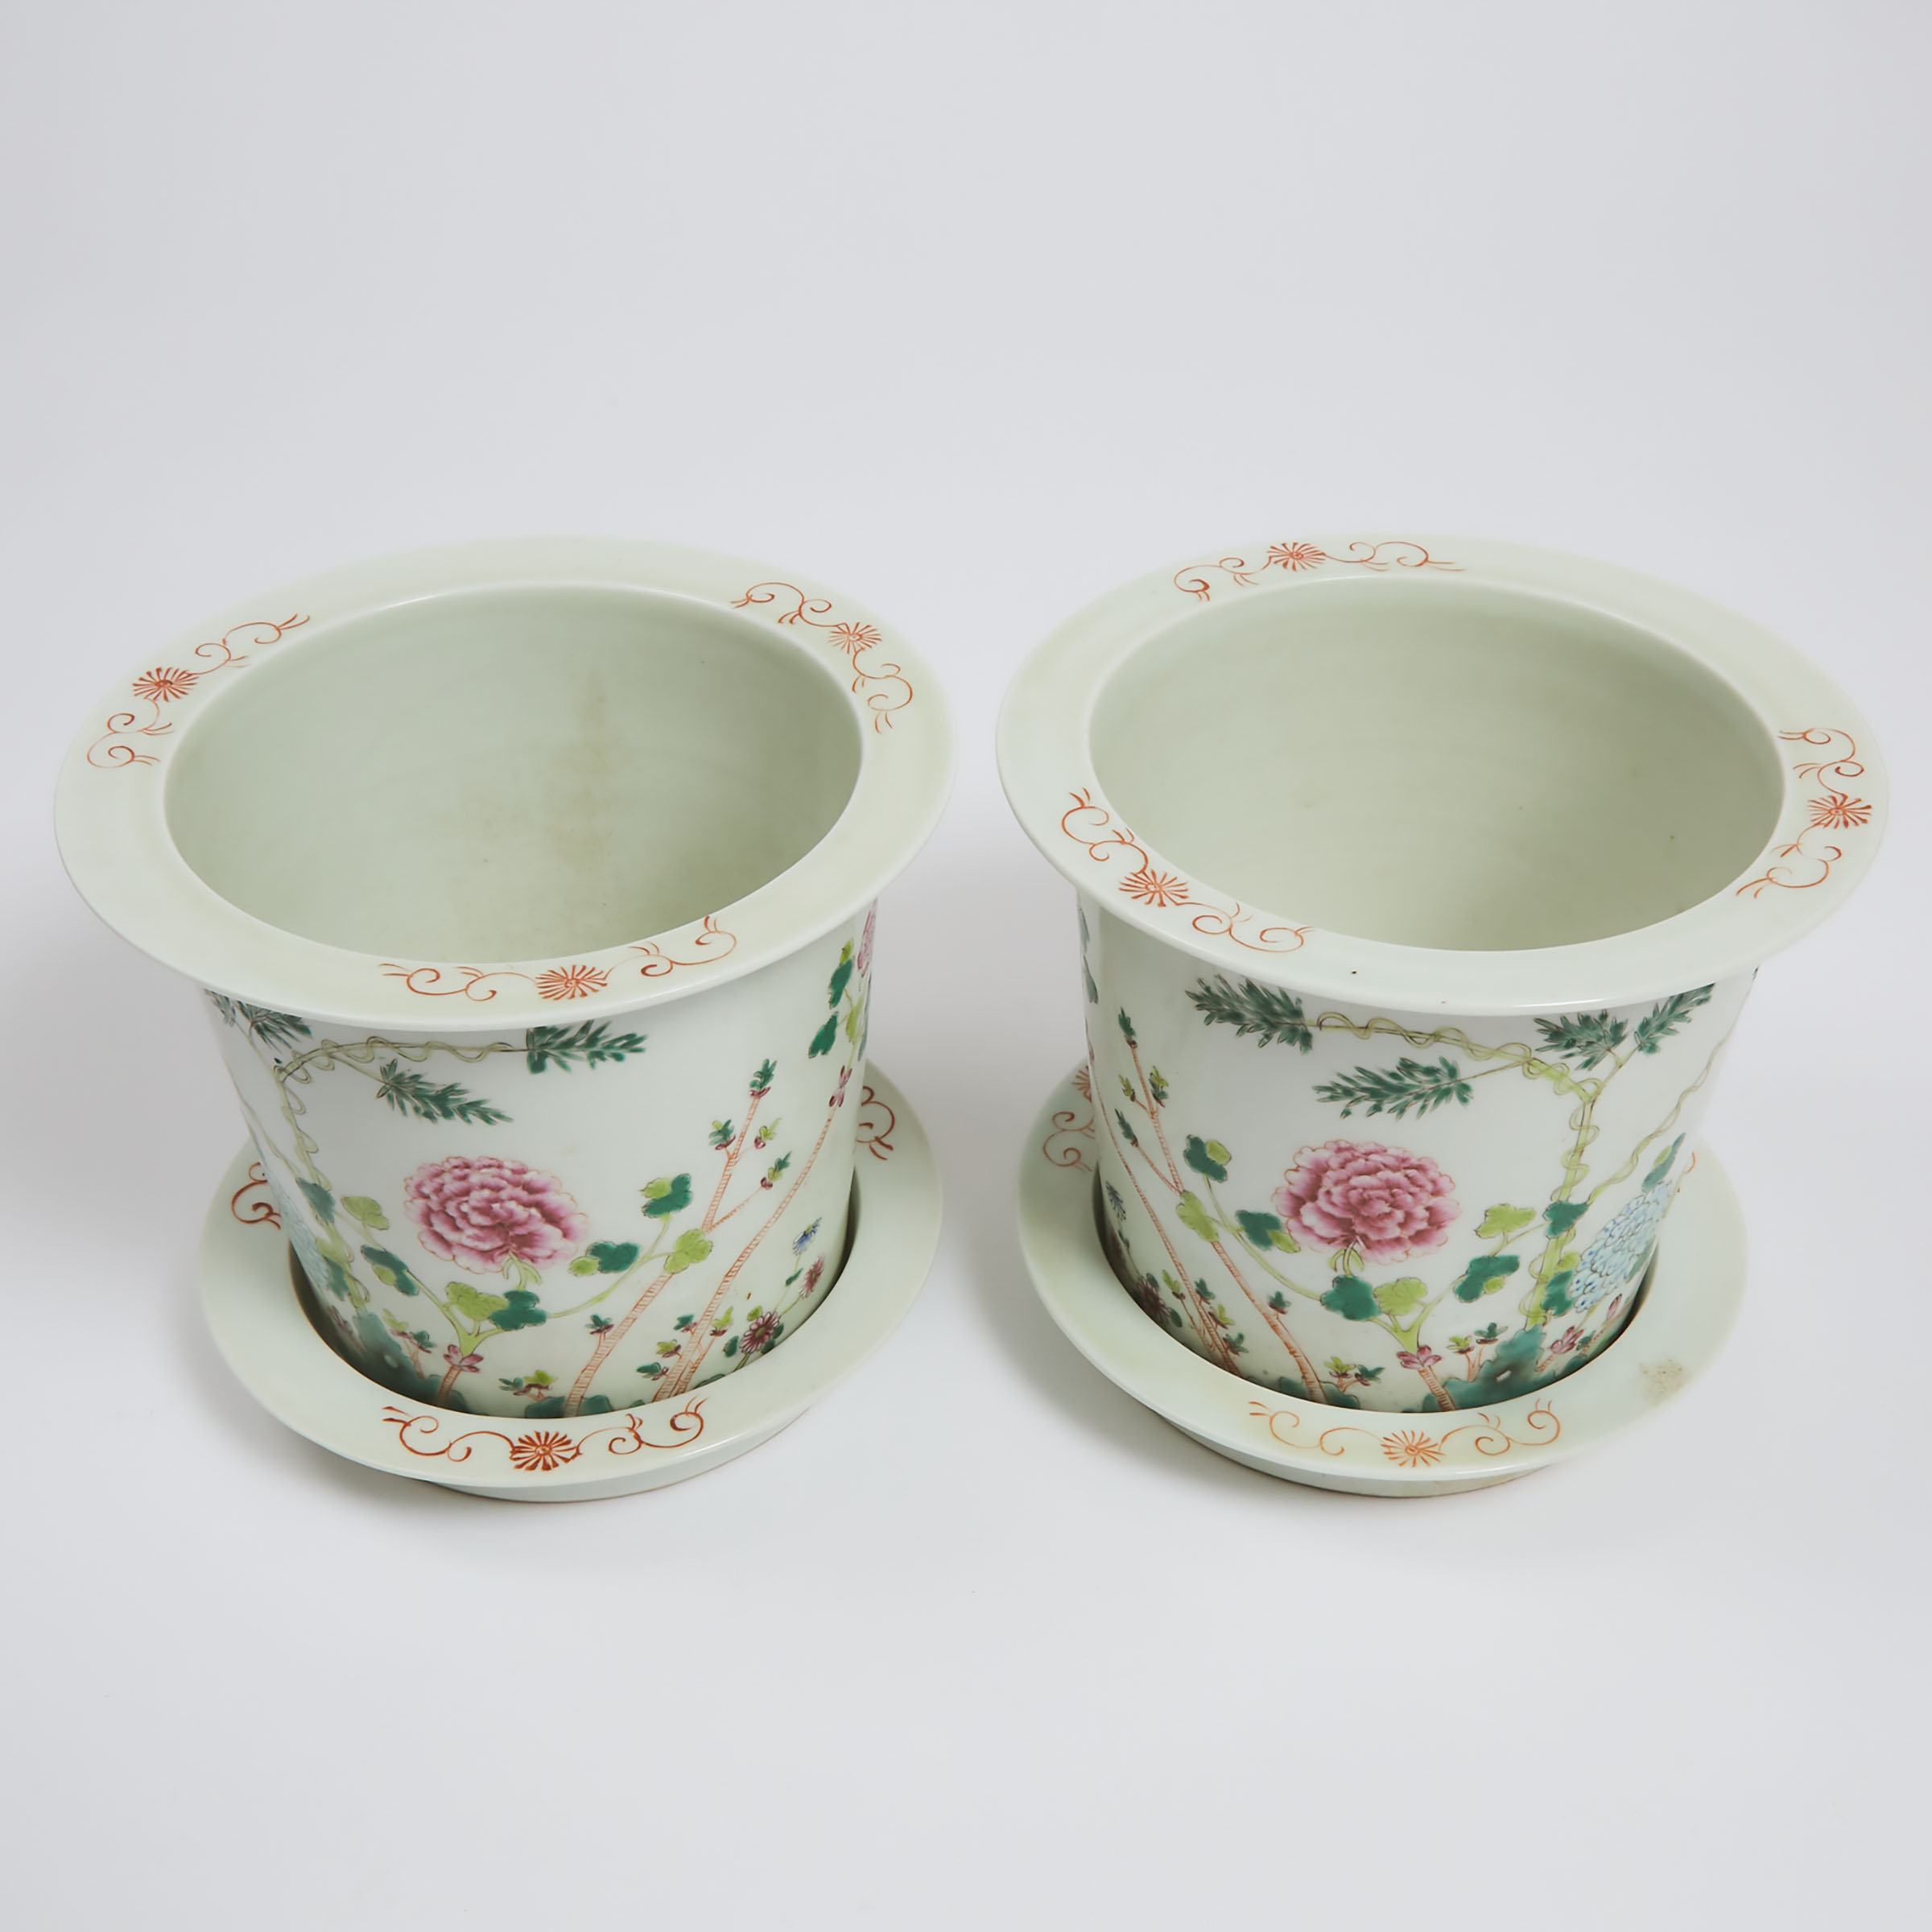 A Pair of Famille Rose 'Floral' Planters and Trays, Hongxian Mark, Republican Period